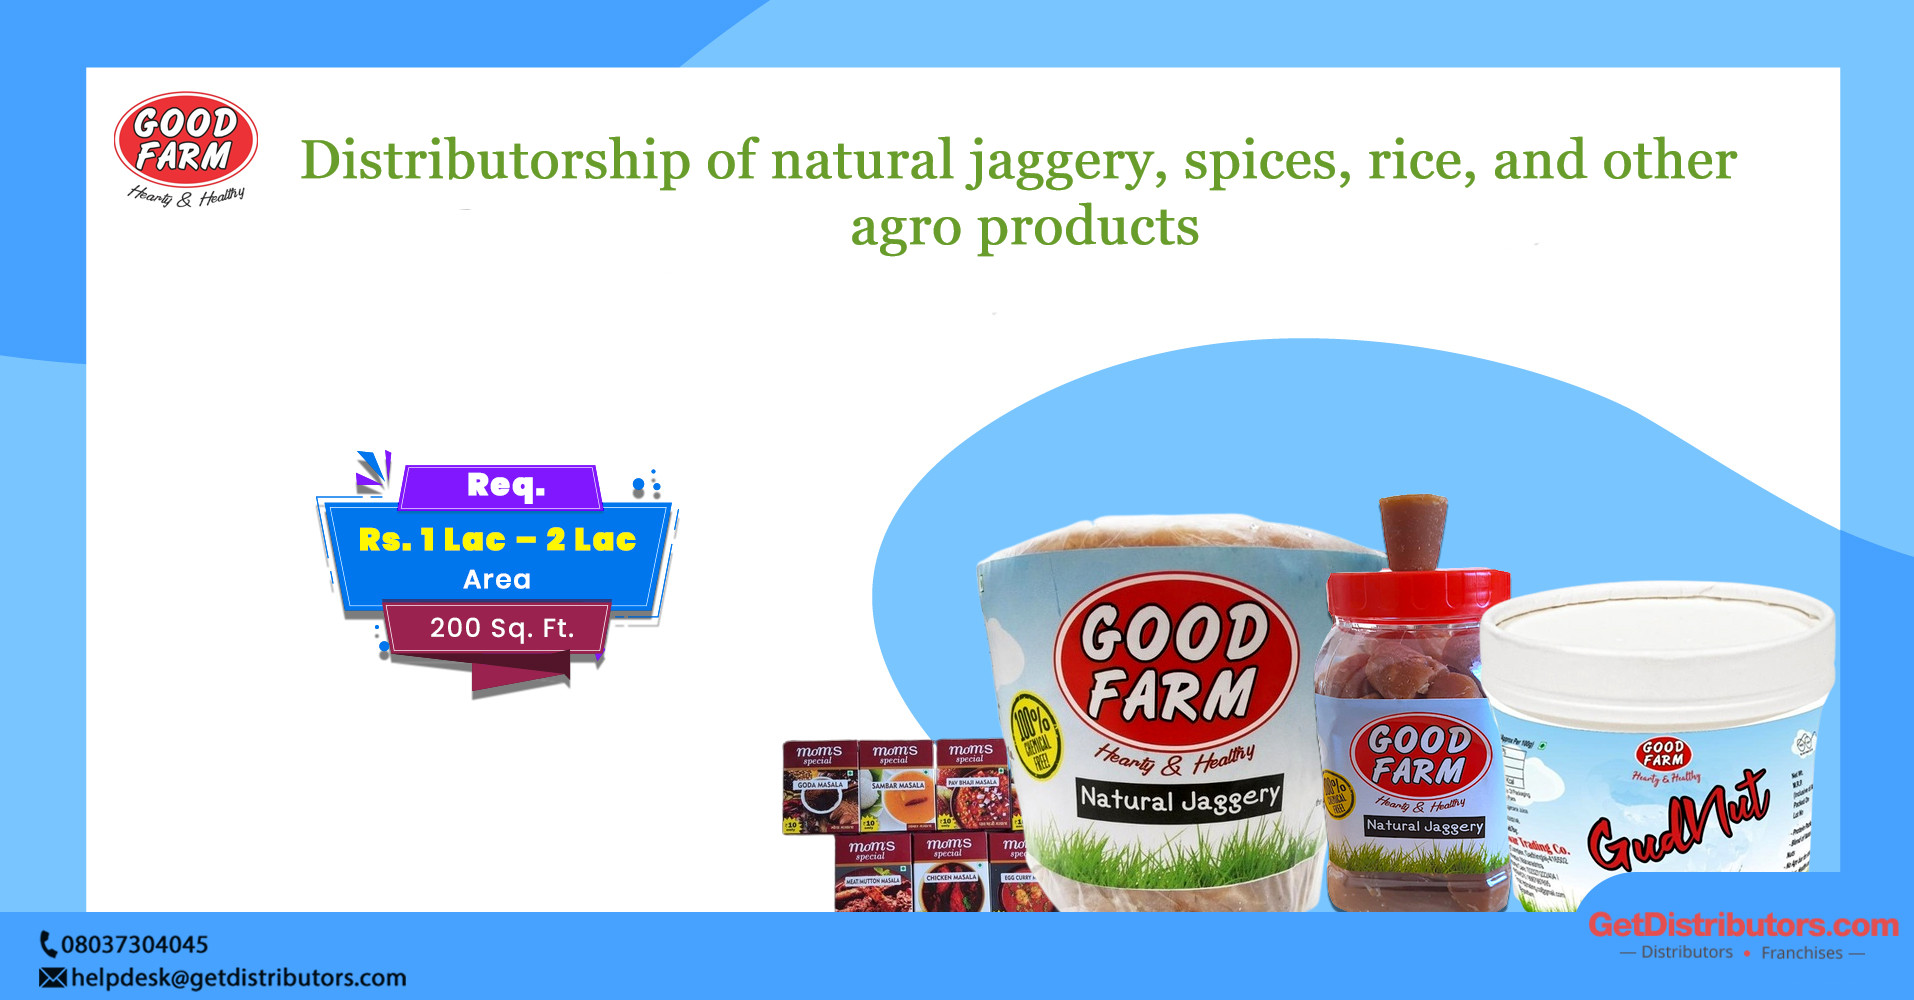 Distributorship of natural jaggery, spices, rice, and other agro products